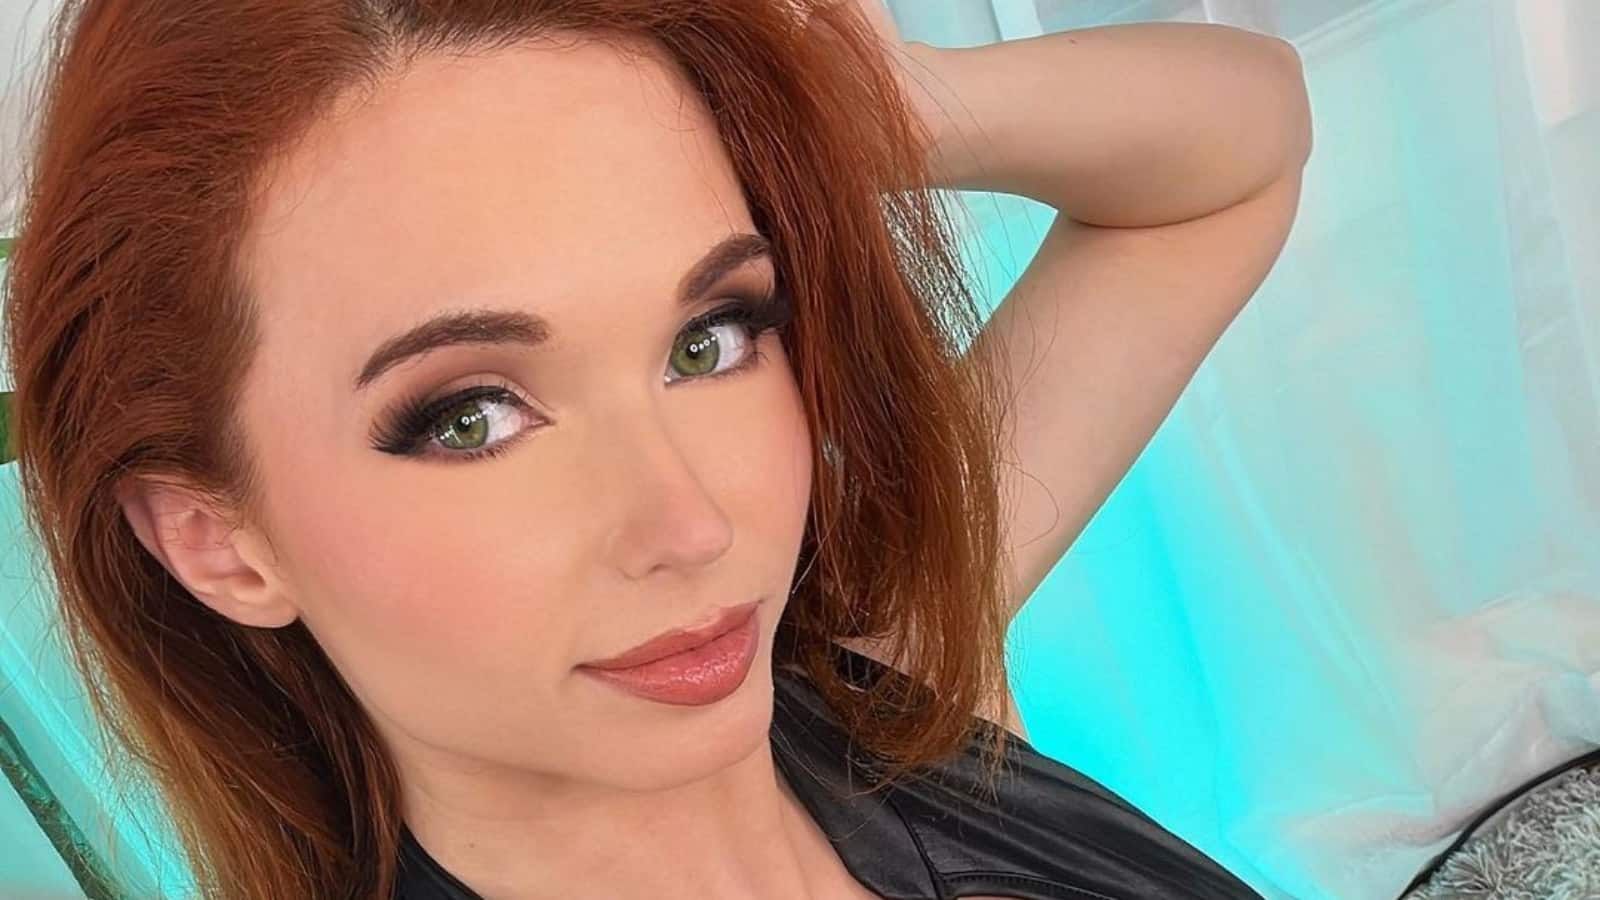 Amouranth retires from OF